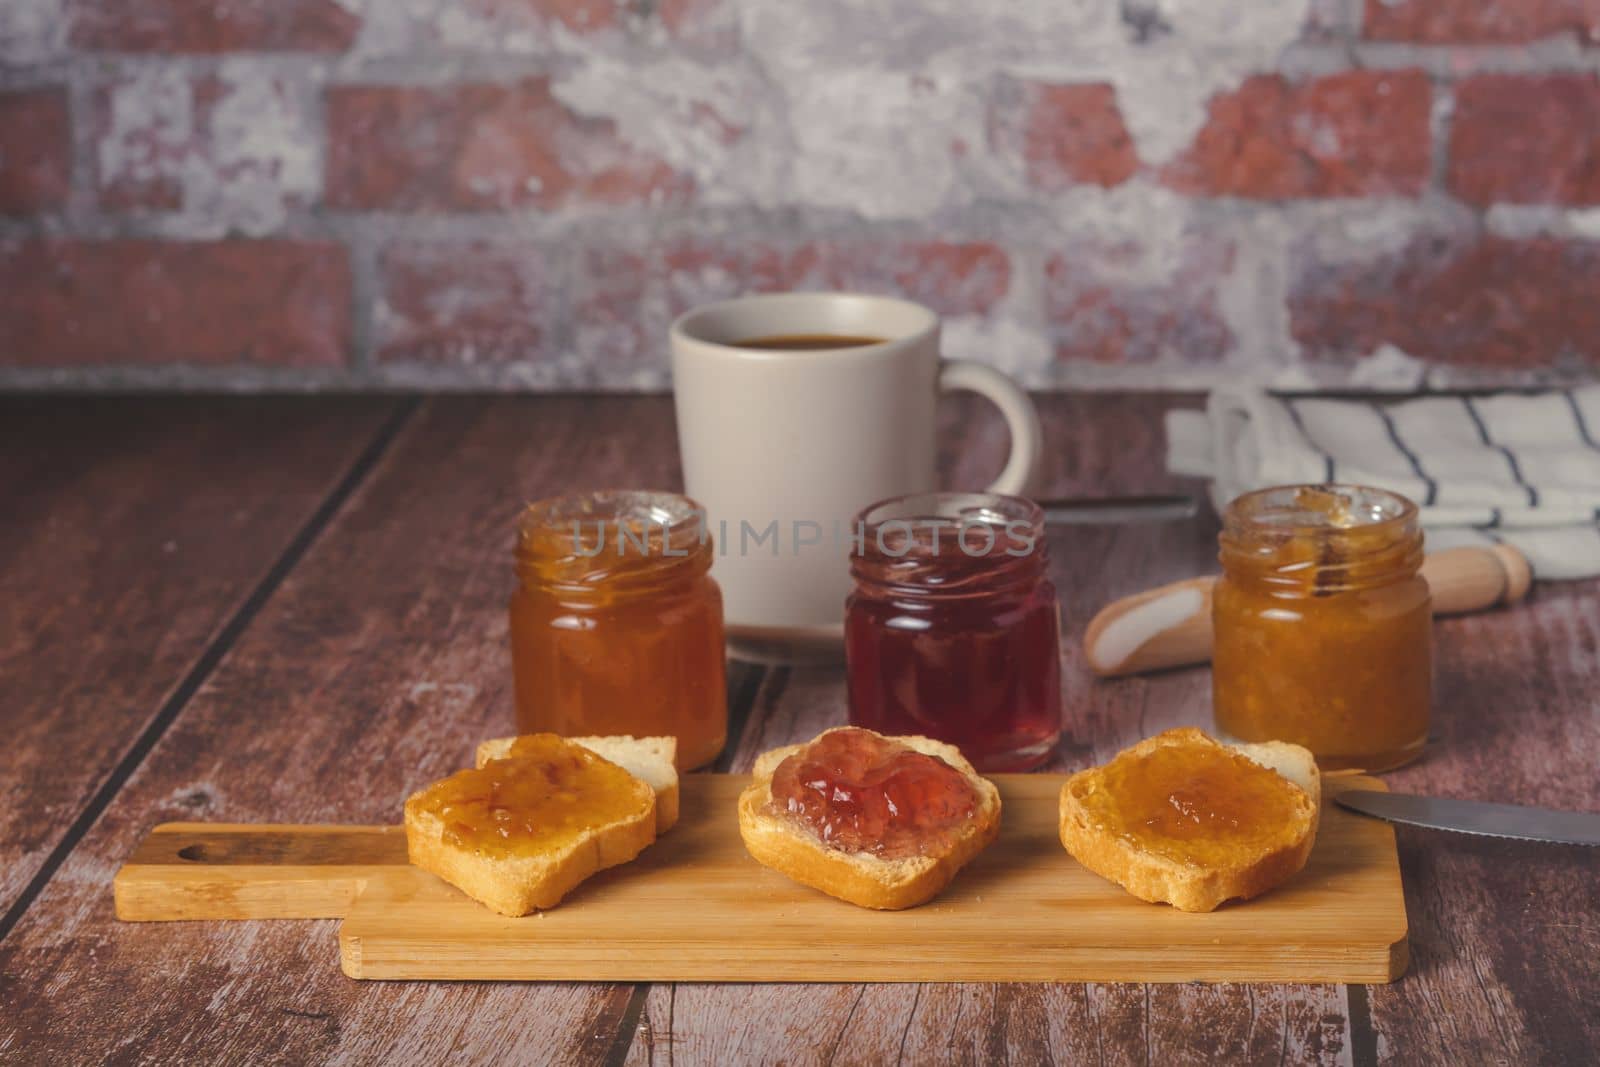 small pieces of toast with jam and coffee on a wooden table